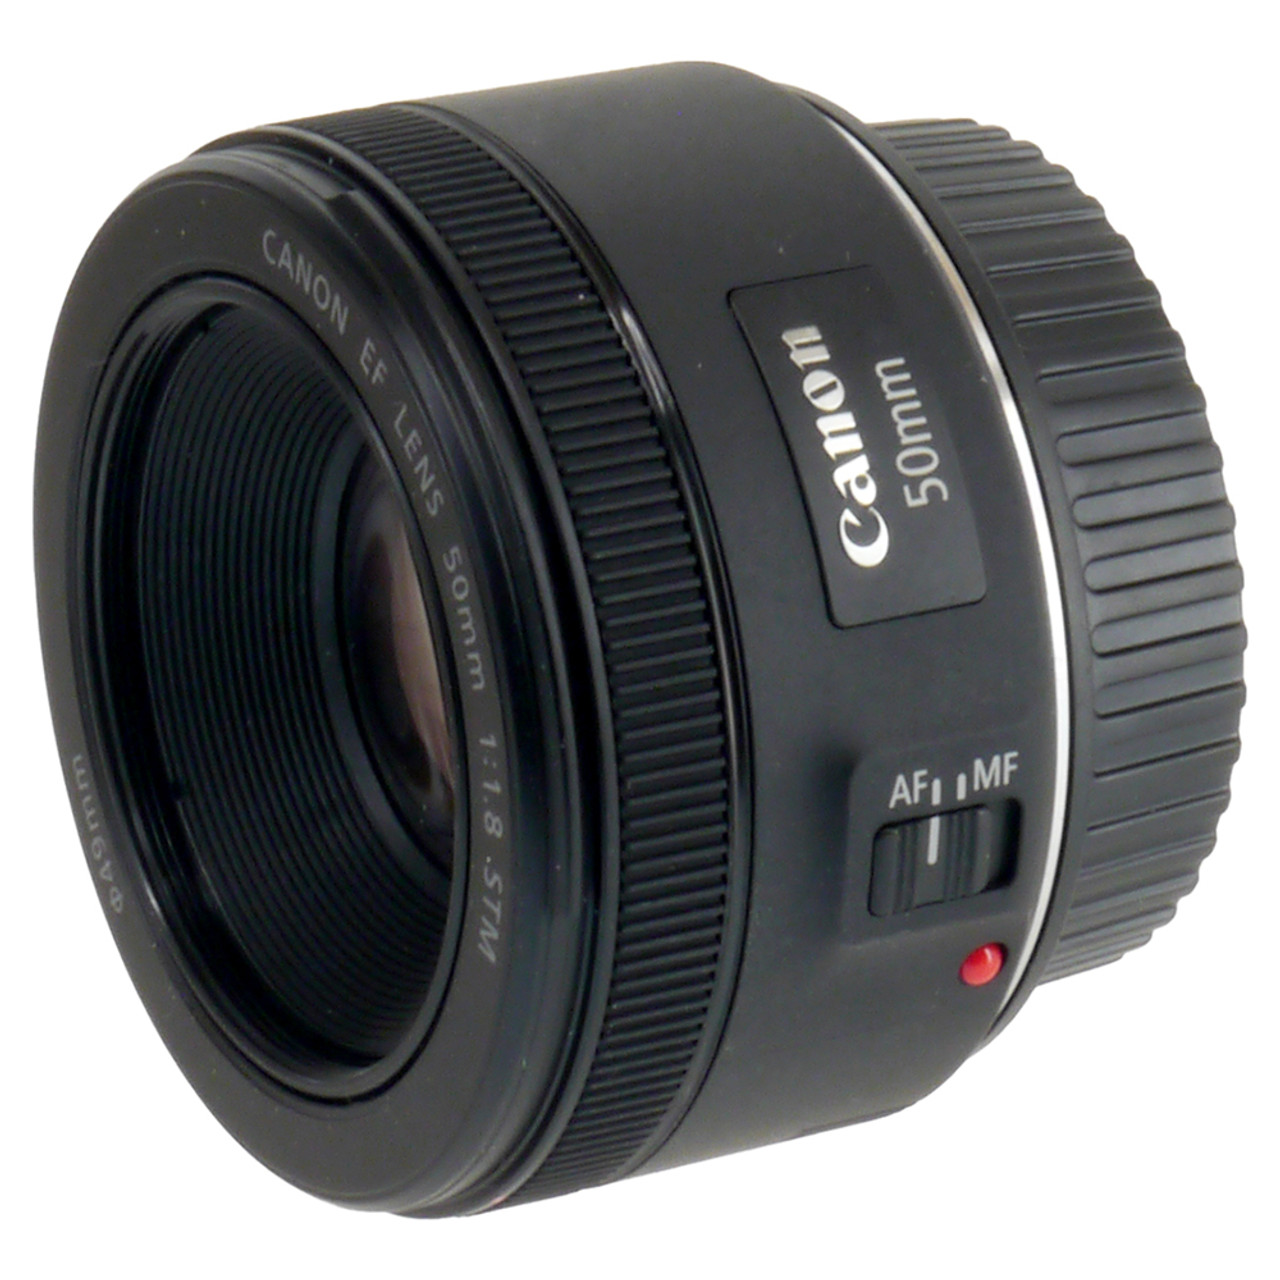 USED CANON EF 50MM F1.8 STM (765115)